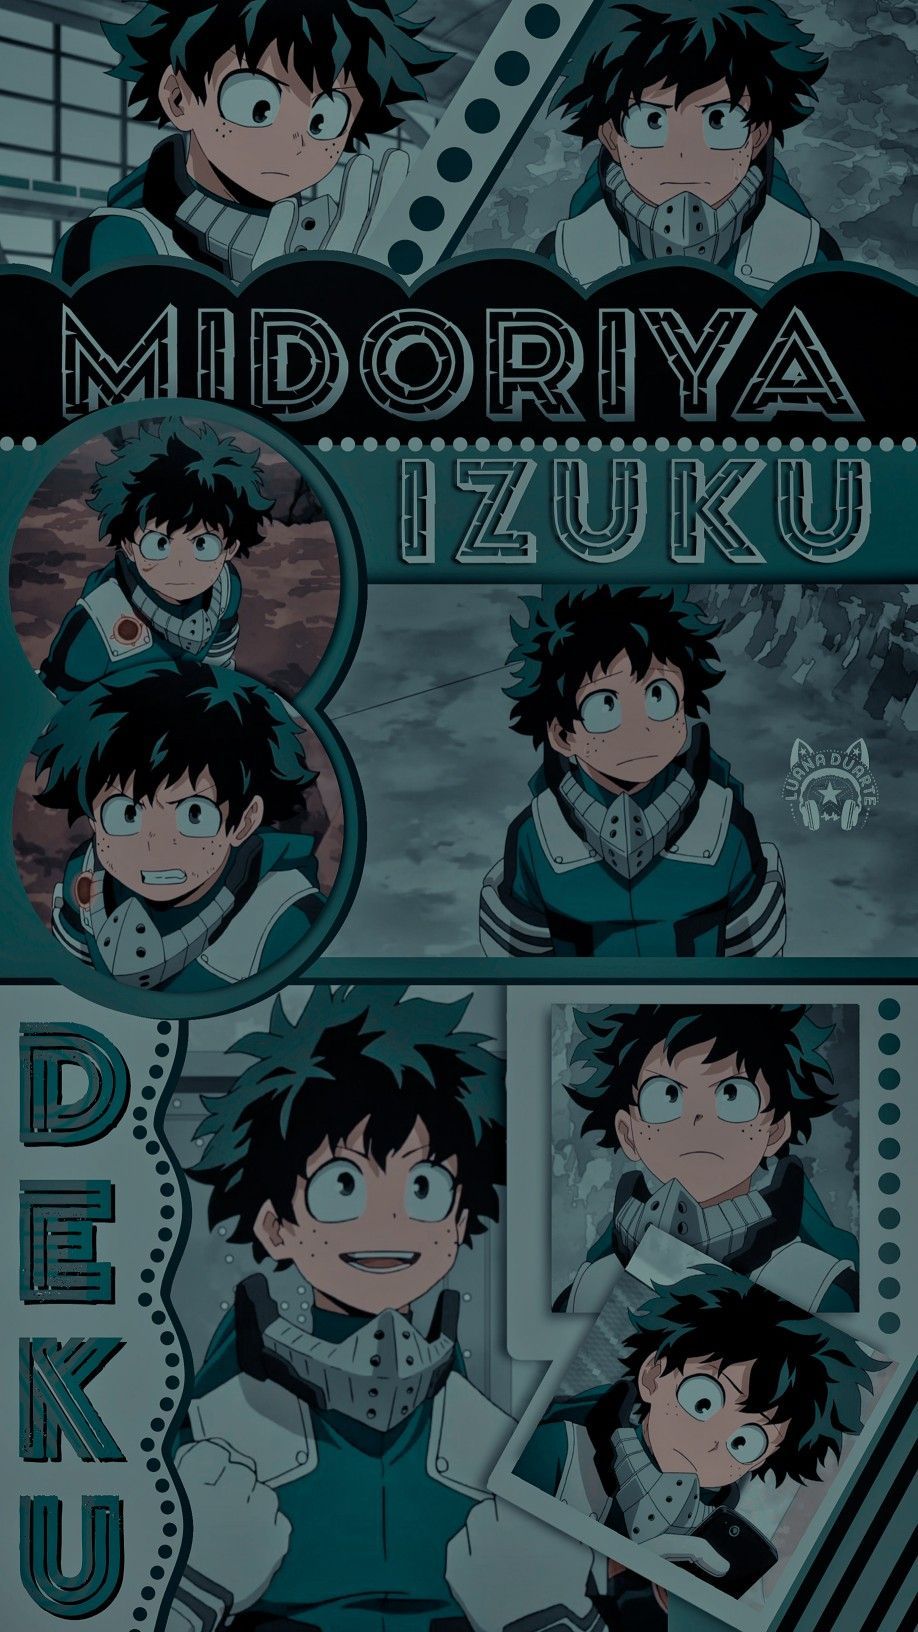 Midoriya Izuku, also known as Deku, is the main protagonist of My Hero Academia. He is a young man with green hair and glasses who possesses incredible strength and a kind heart. - Deku